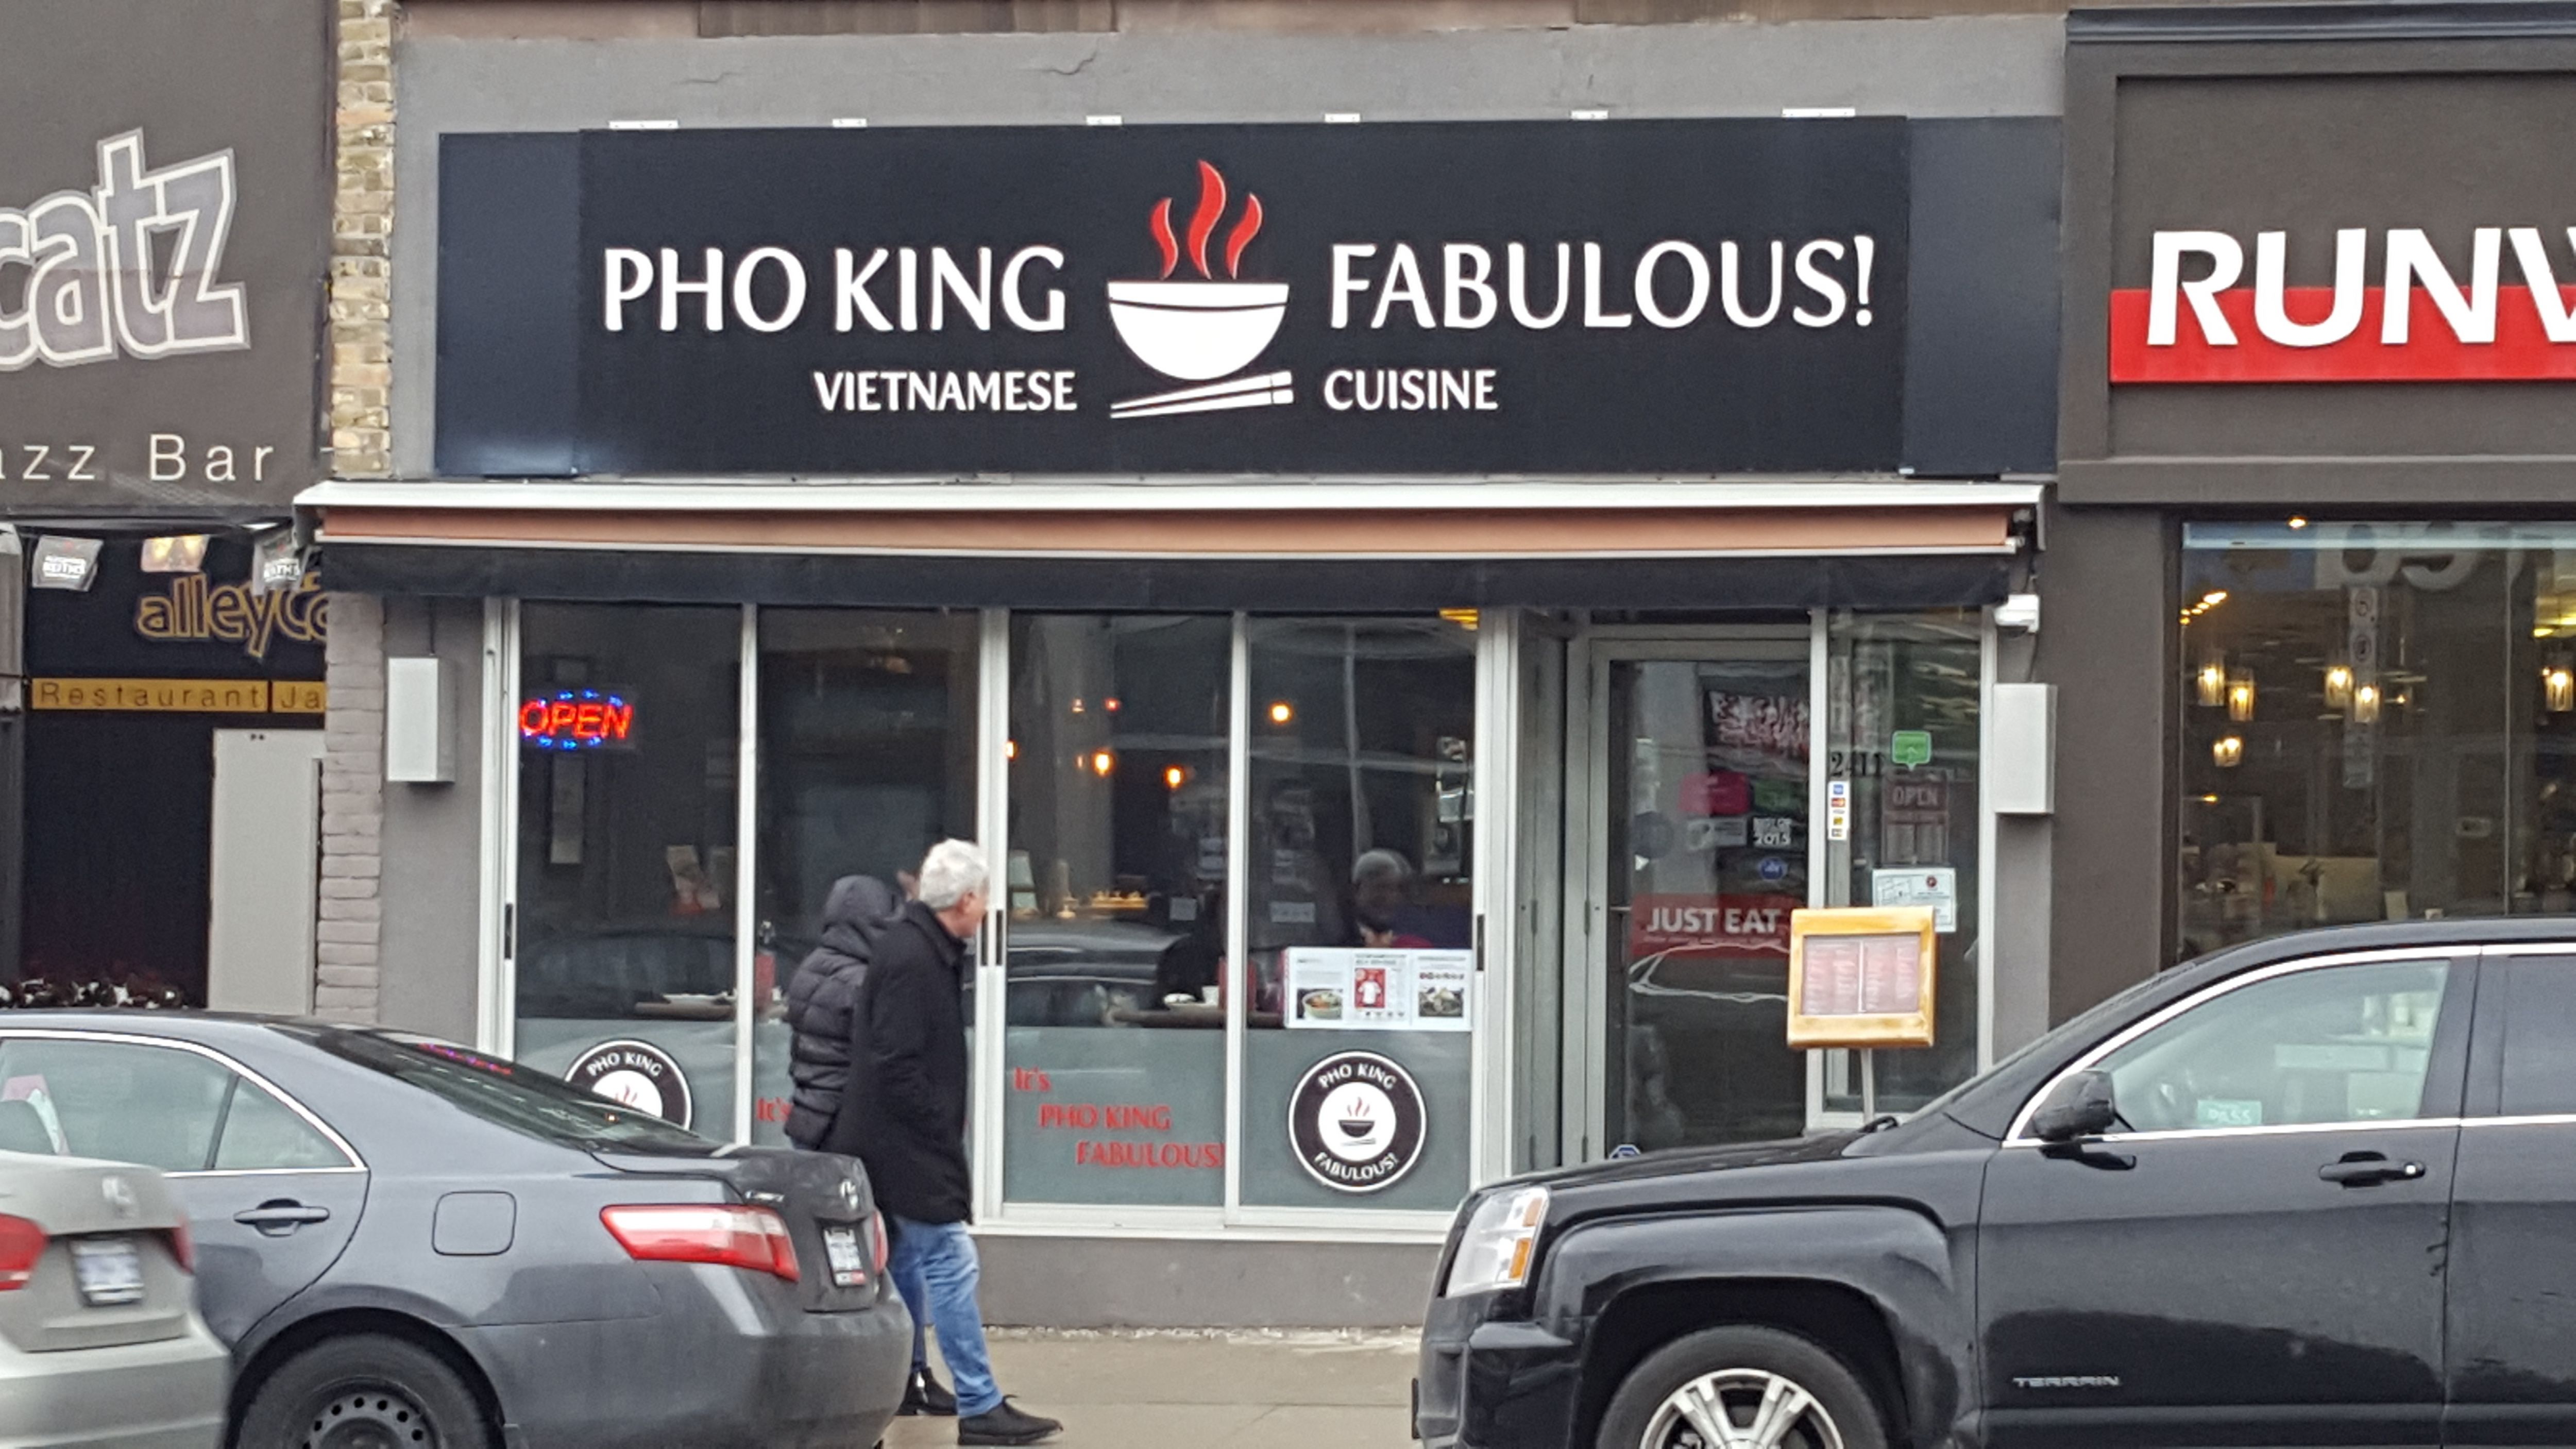 How's that new Vietnamese place?